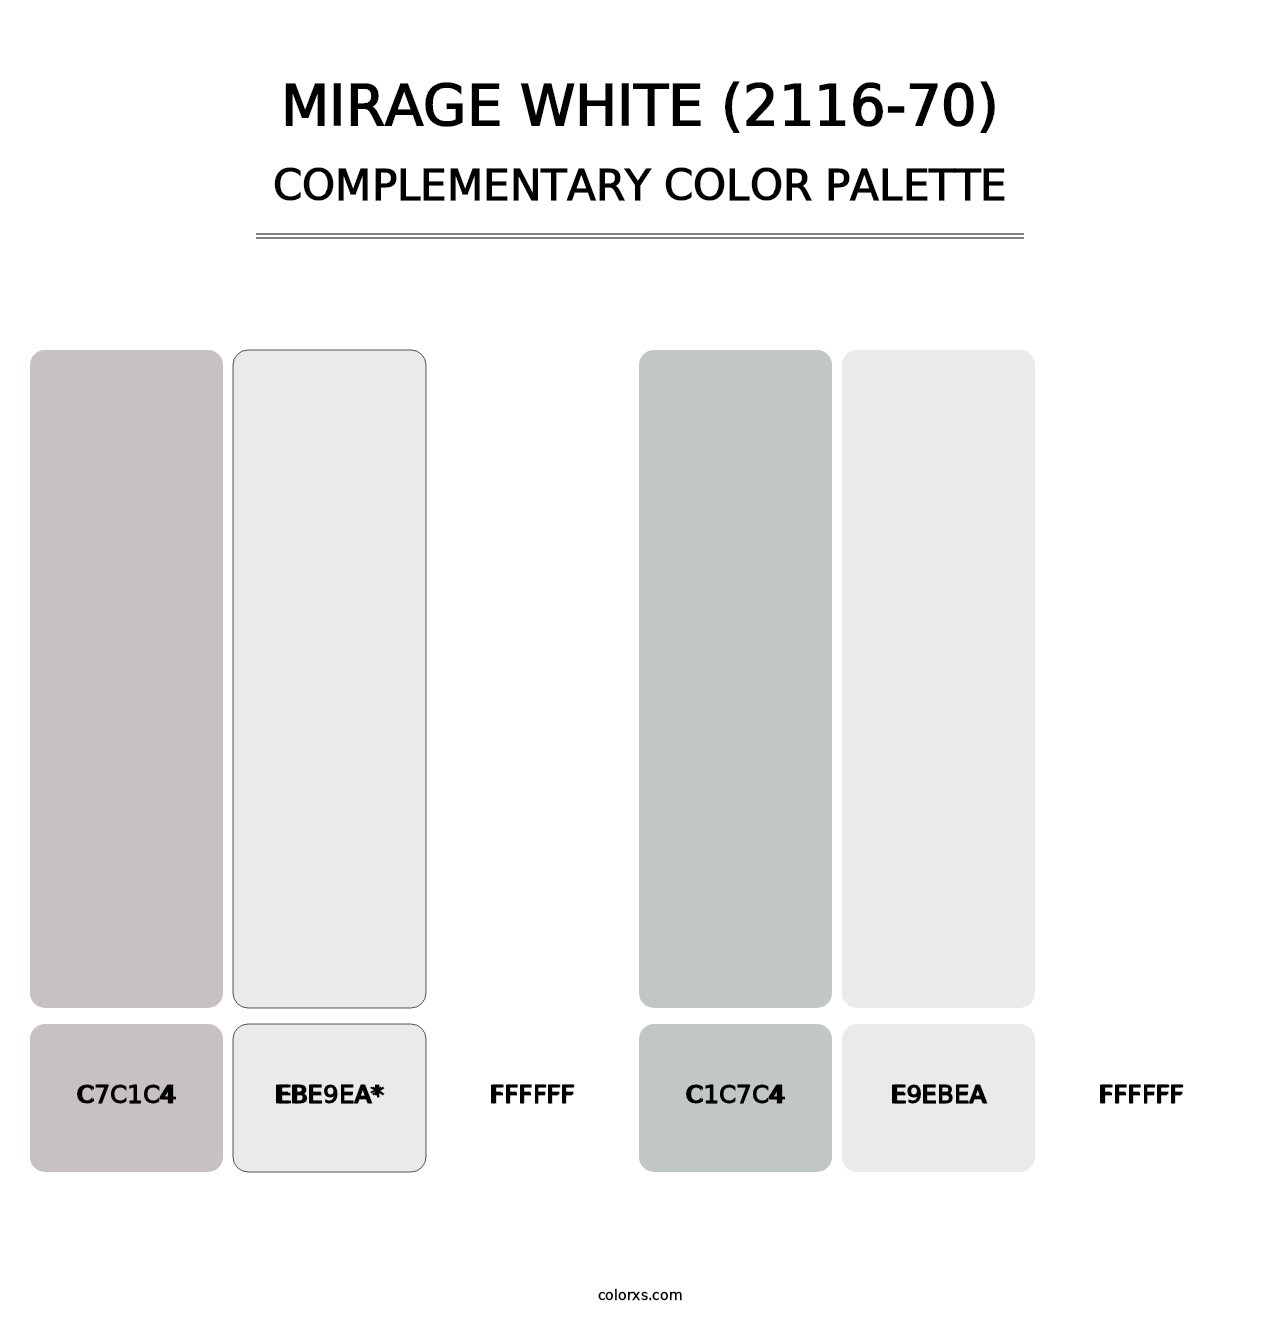 Mirage White (2116-70) - Complementary Color Palette